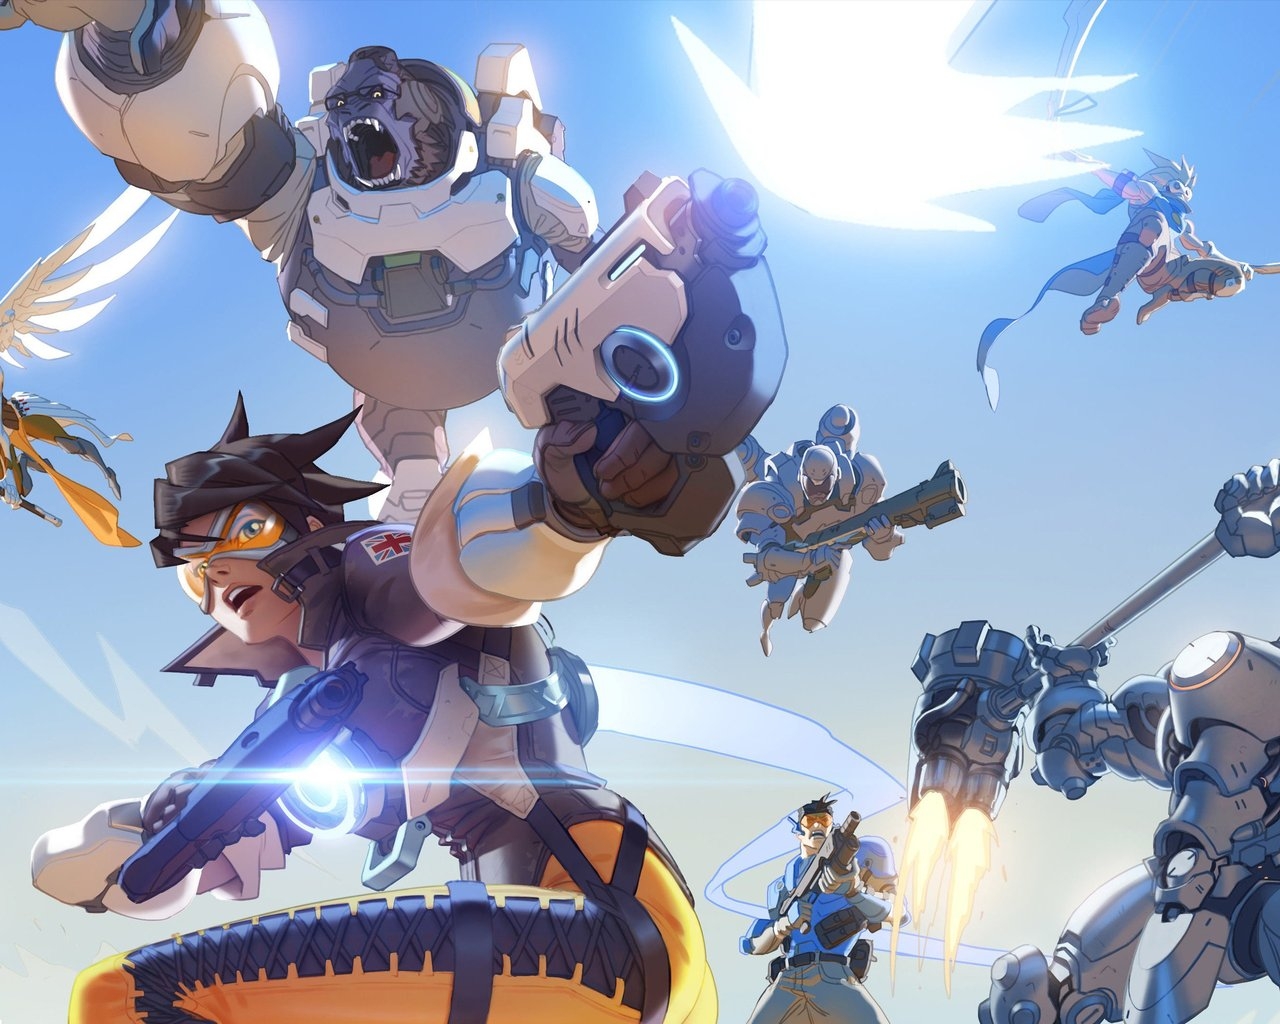 Overwatch Game for 1280 x 1024 resolution